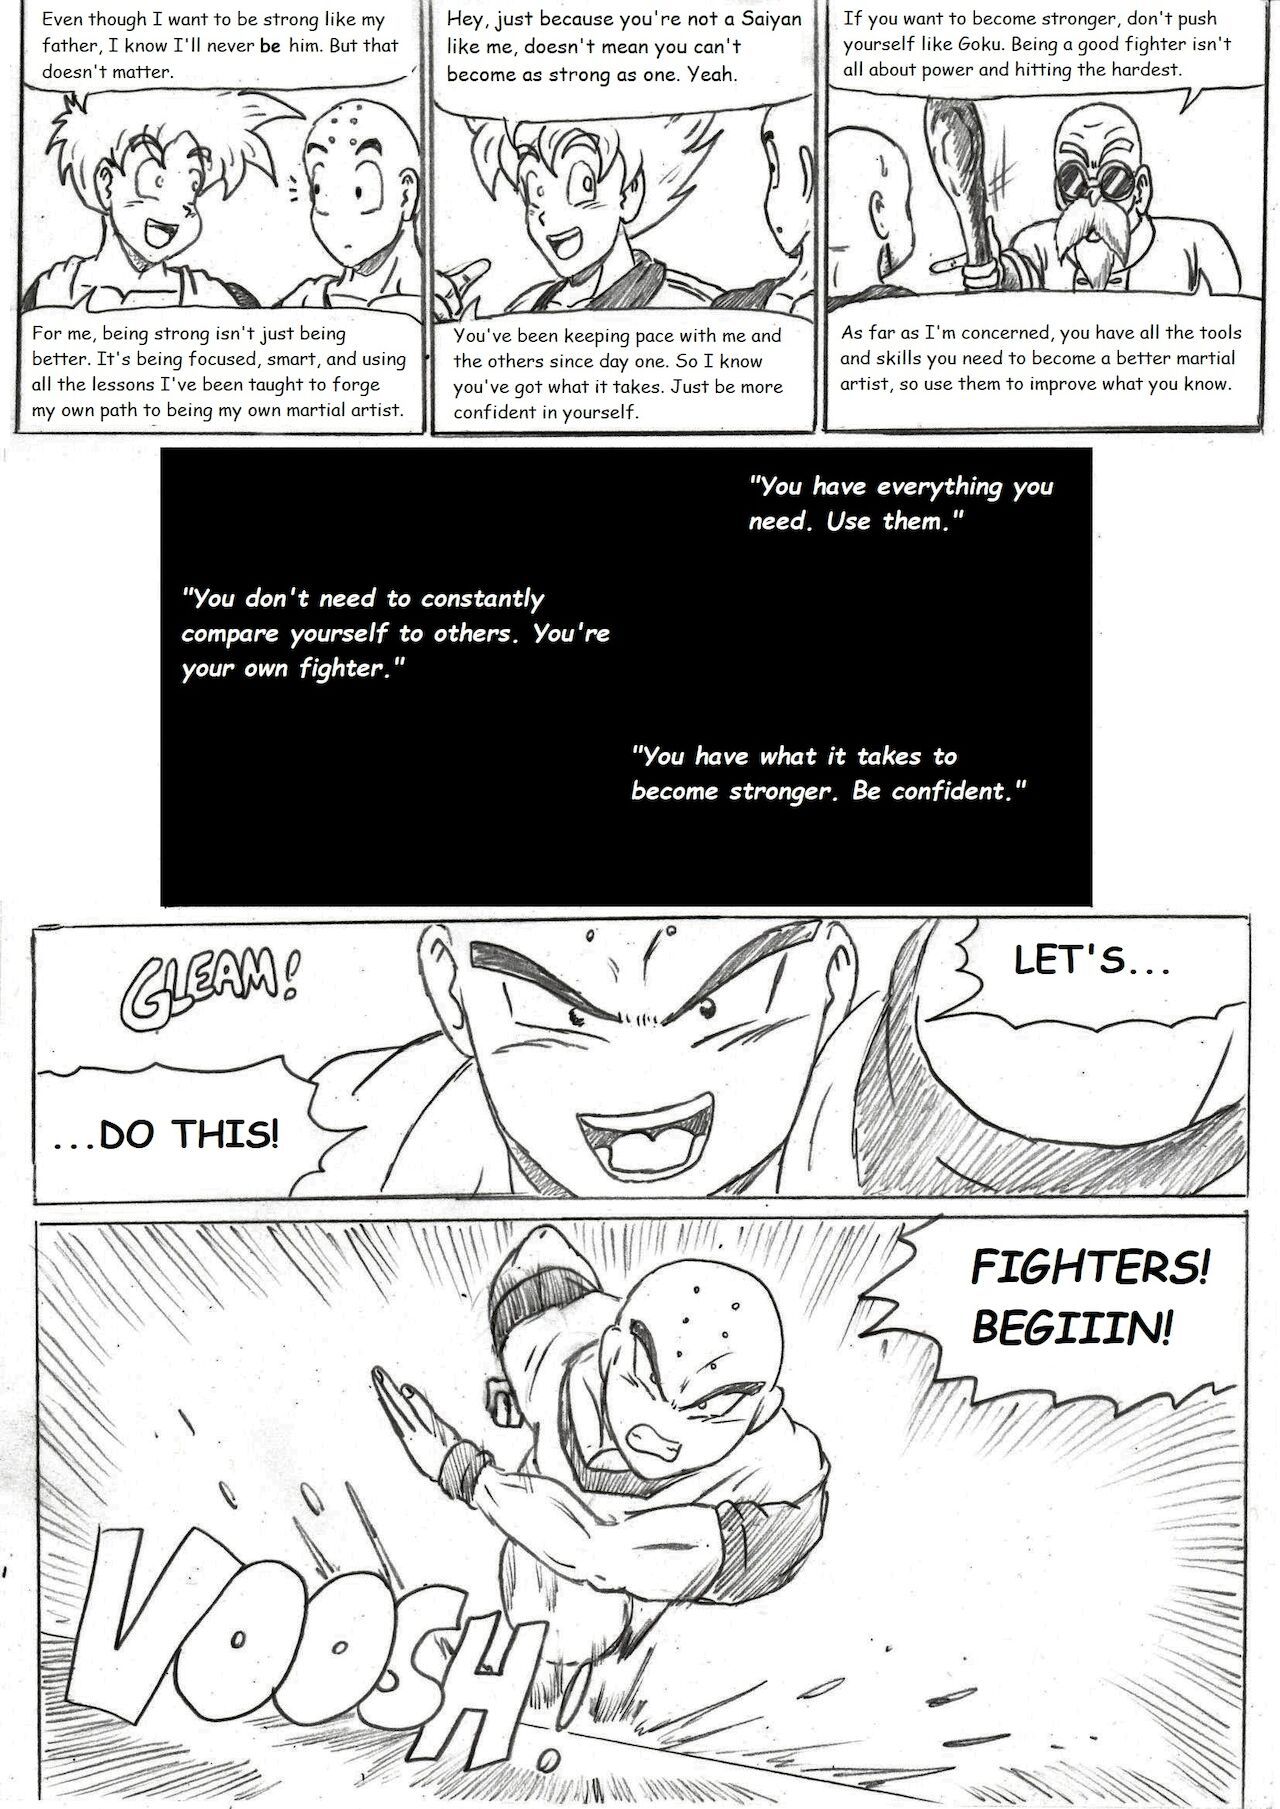 [TheWriteFiction] Dragonball Z Golden Age - Chapter 3 - The Strange Tournament (Ongoing) 74